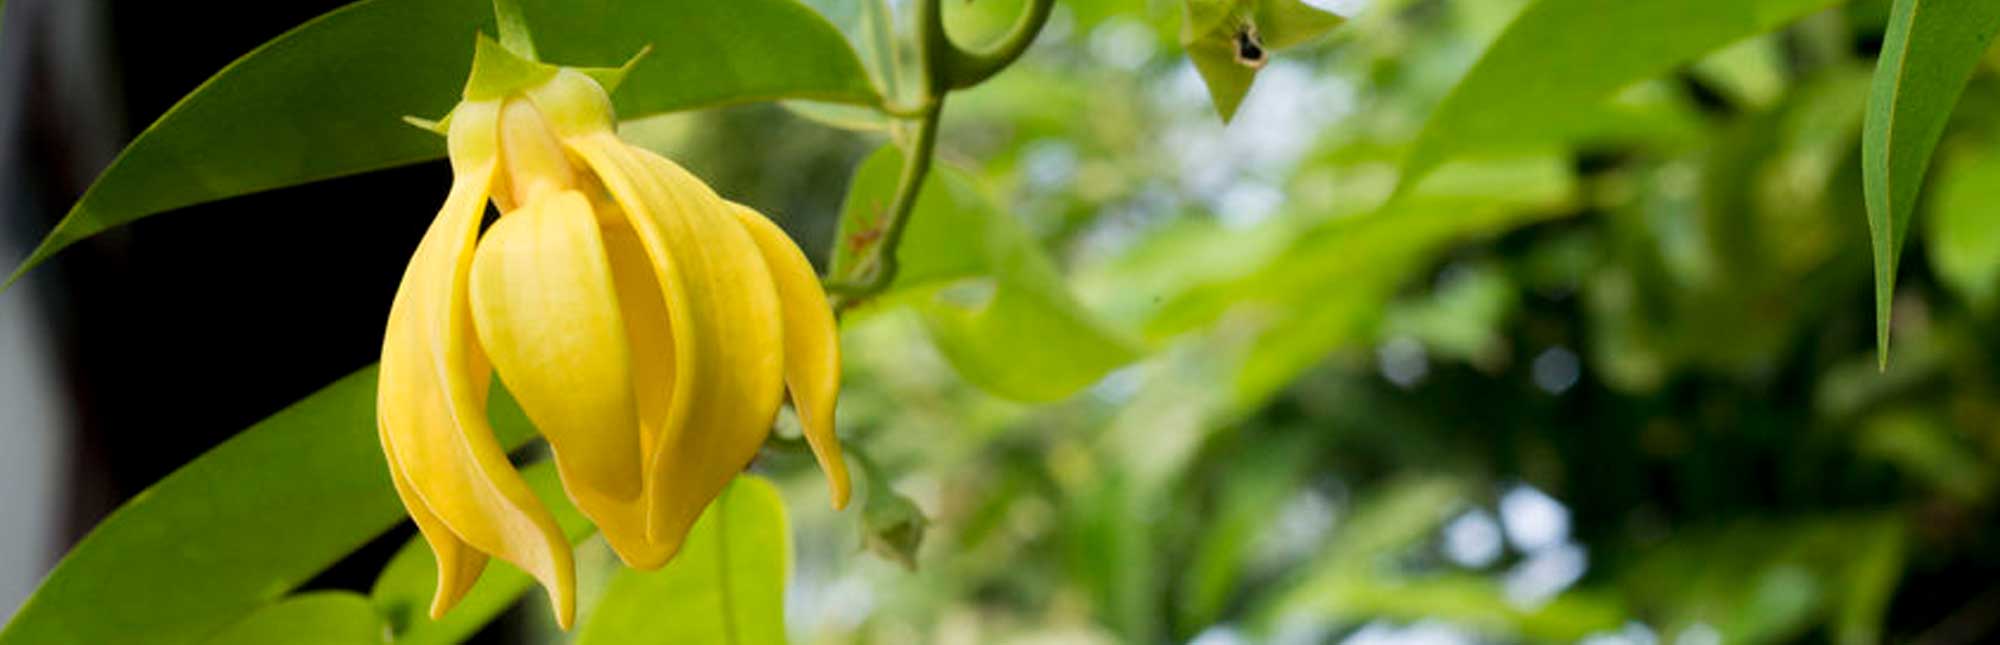 a yellow ylang ylang flower growing on a tree